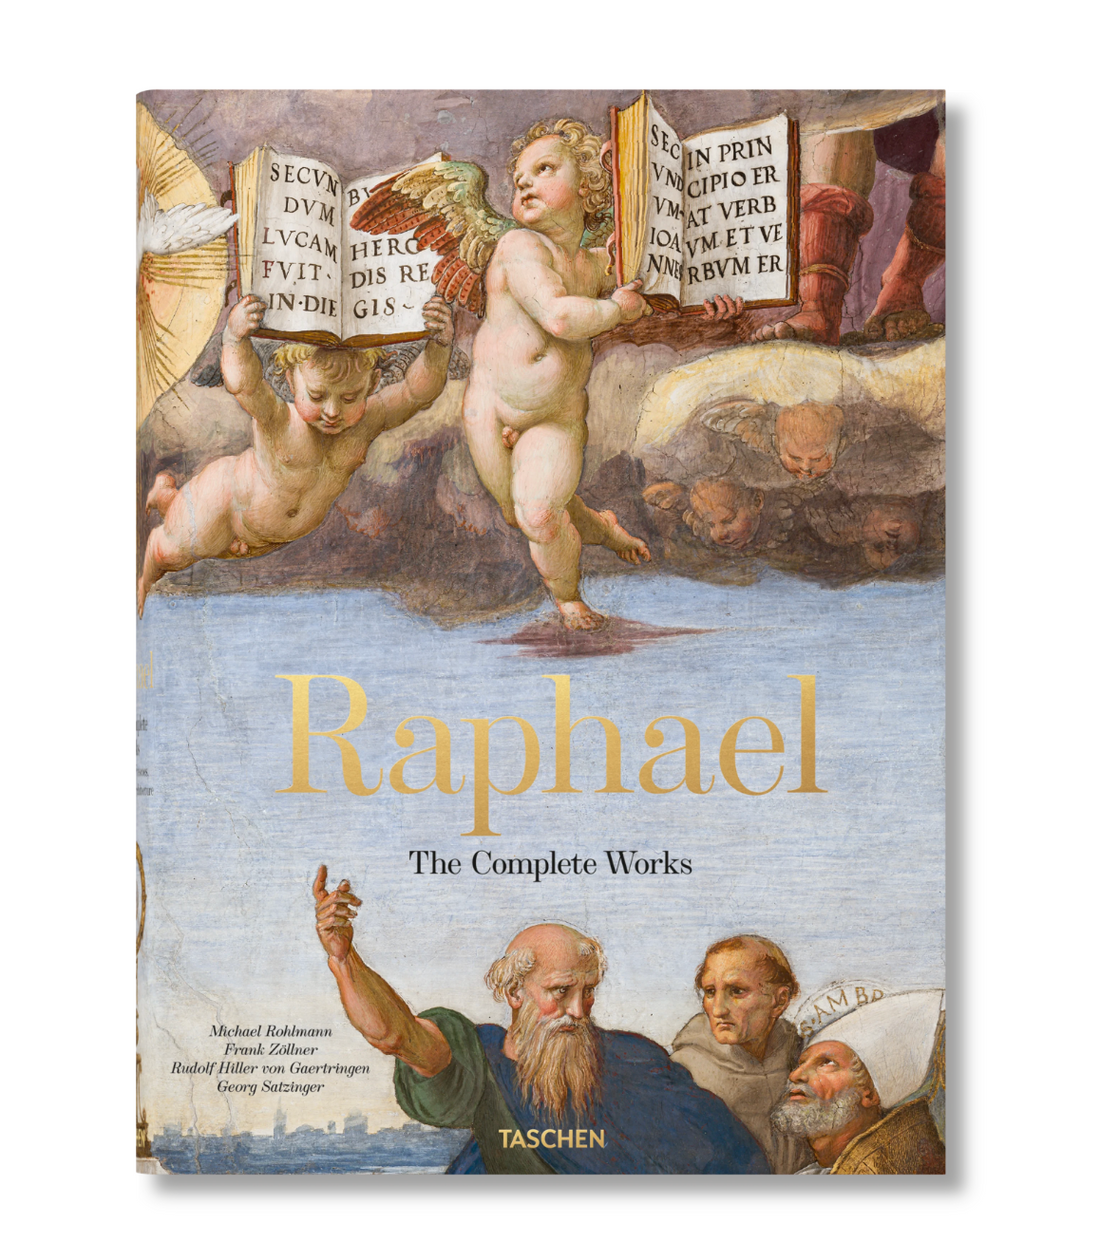 Taschen - Raphael. The Complete Works. Paintings, Frescoes, Tapestries, Architecture